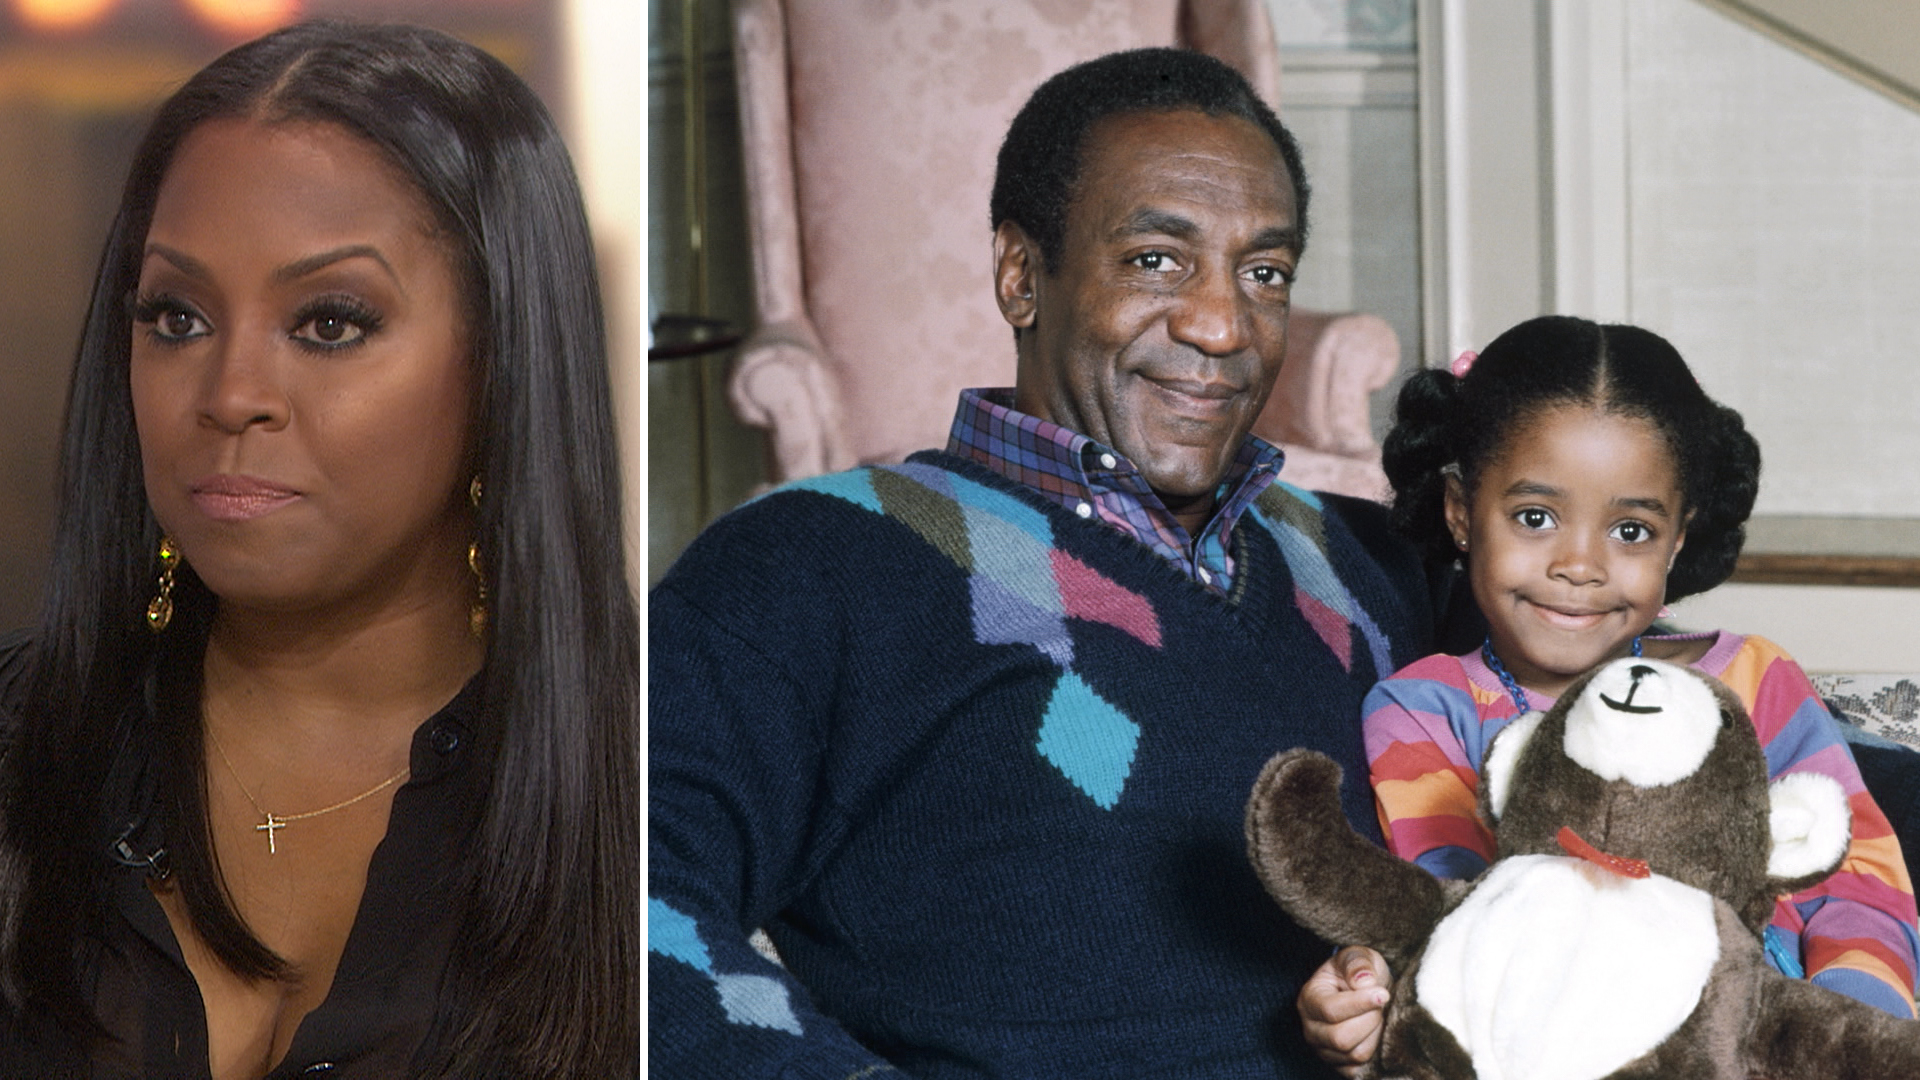 Keshia Knight Pulliam: Cosby allegations are 'an unfortunate situation'